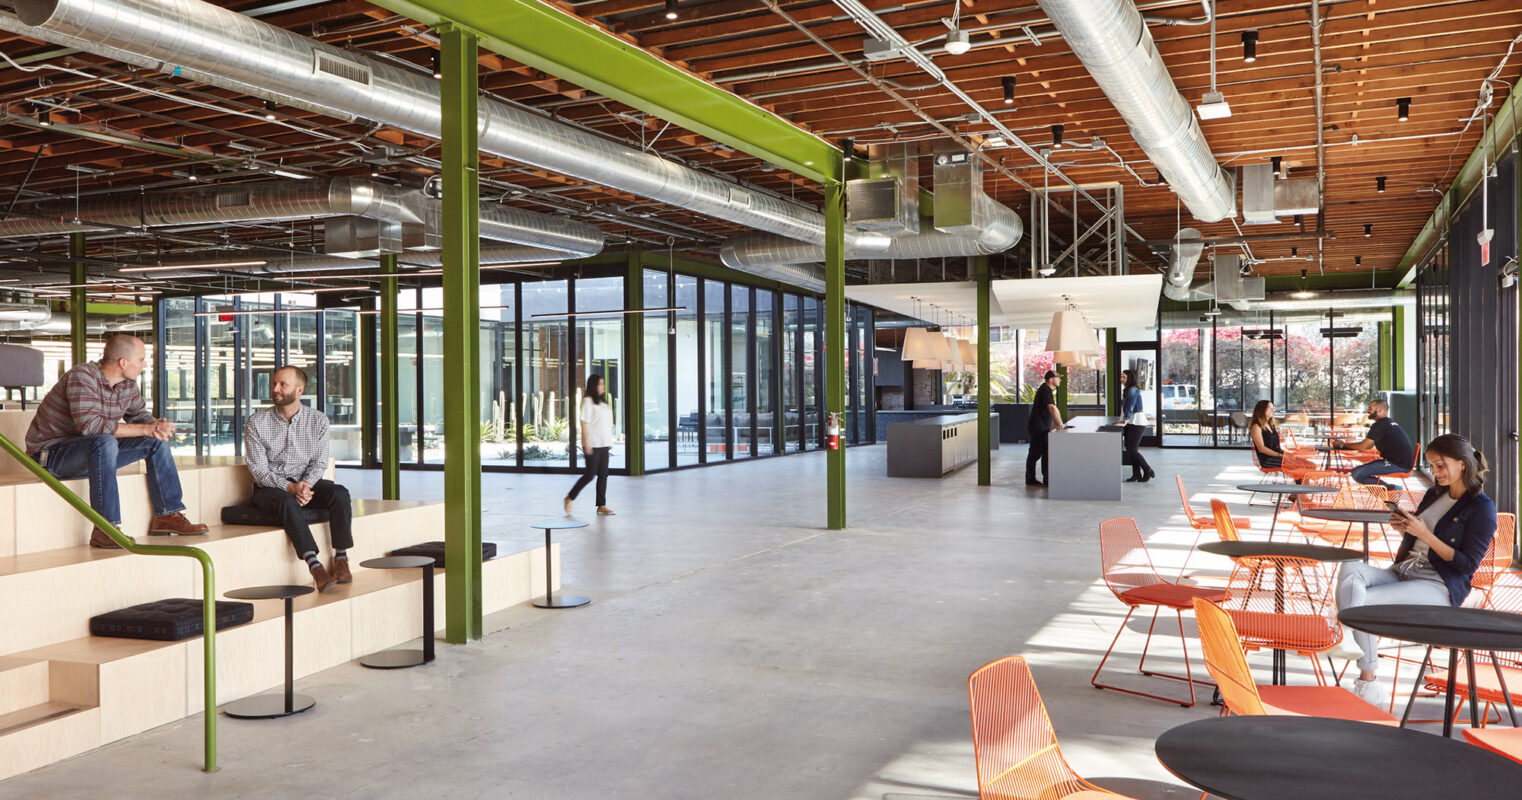 Modern office break area with industrial-style exposed ceiling, vibrant orange chairs, and employees enjoying a casual conversation.